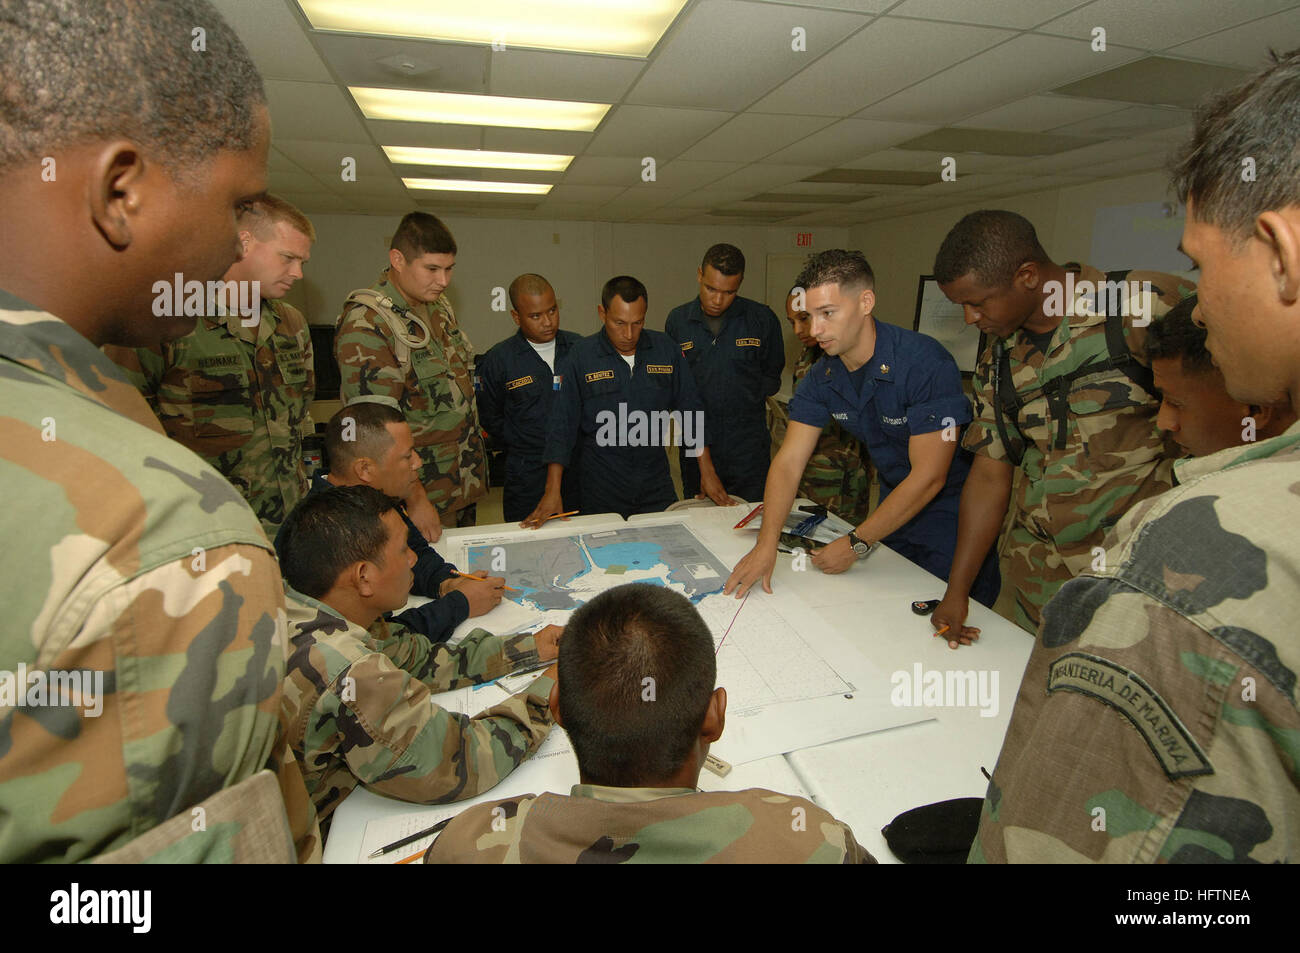 Colon, Panama (07 May 2007), Boatswain's Mate 2nd Class Juan Rodriguez, Expeditionary Training Command, assists Servicio Maritimo Nacional de Panama (Panamanian National Maritime Service) members with finding a point on a map given the latitude and longitude during training on board High Speed Vessel (HSV) 2 SWIFT. Commander, Task Group 40.9 (CTG 40.9) and HSV-2 SWIFT, are deployed as part of the pilot Global Fleet Station (GFS) to the Caribbean basin and Central America.  Global Fleet Station is designed to validate the GFS concept for the Navy and support U.S. Southern Command objectives for Stock Photo